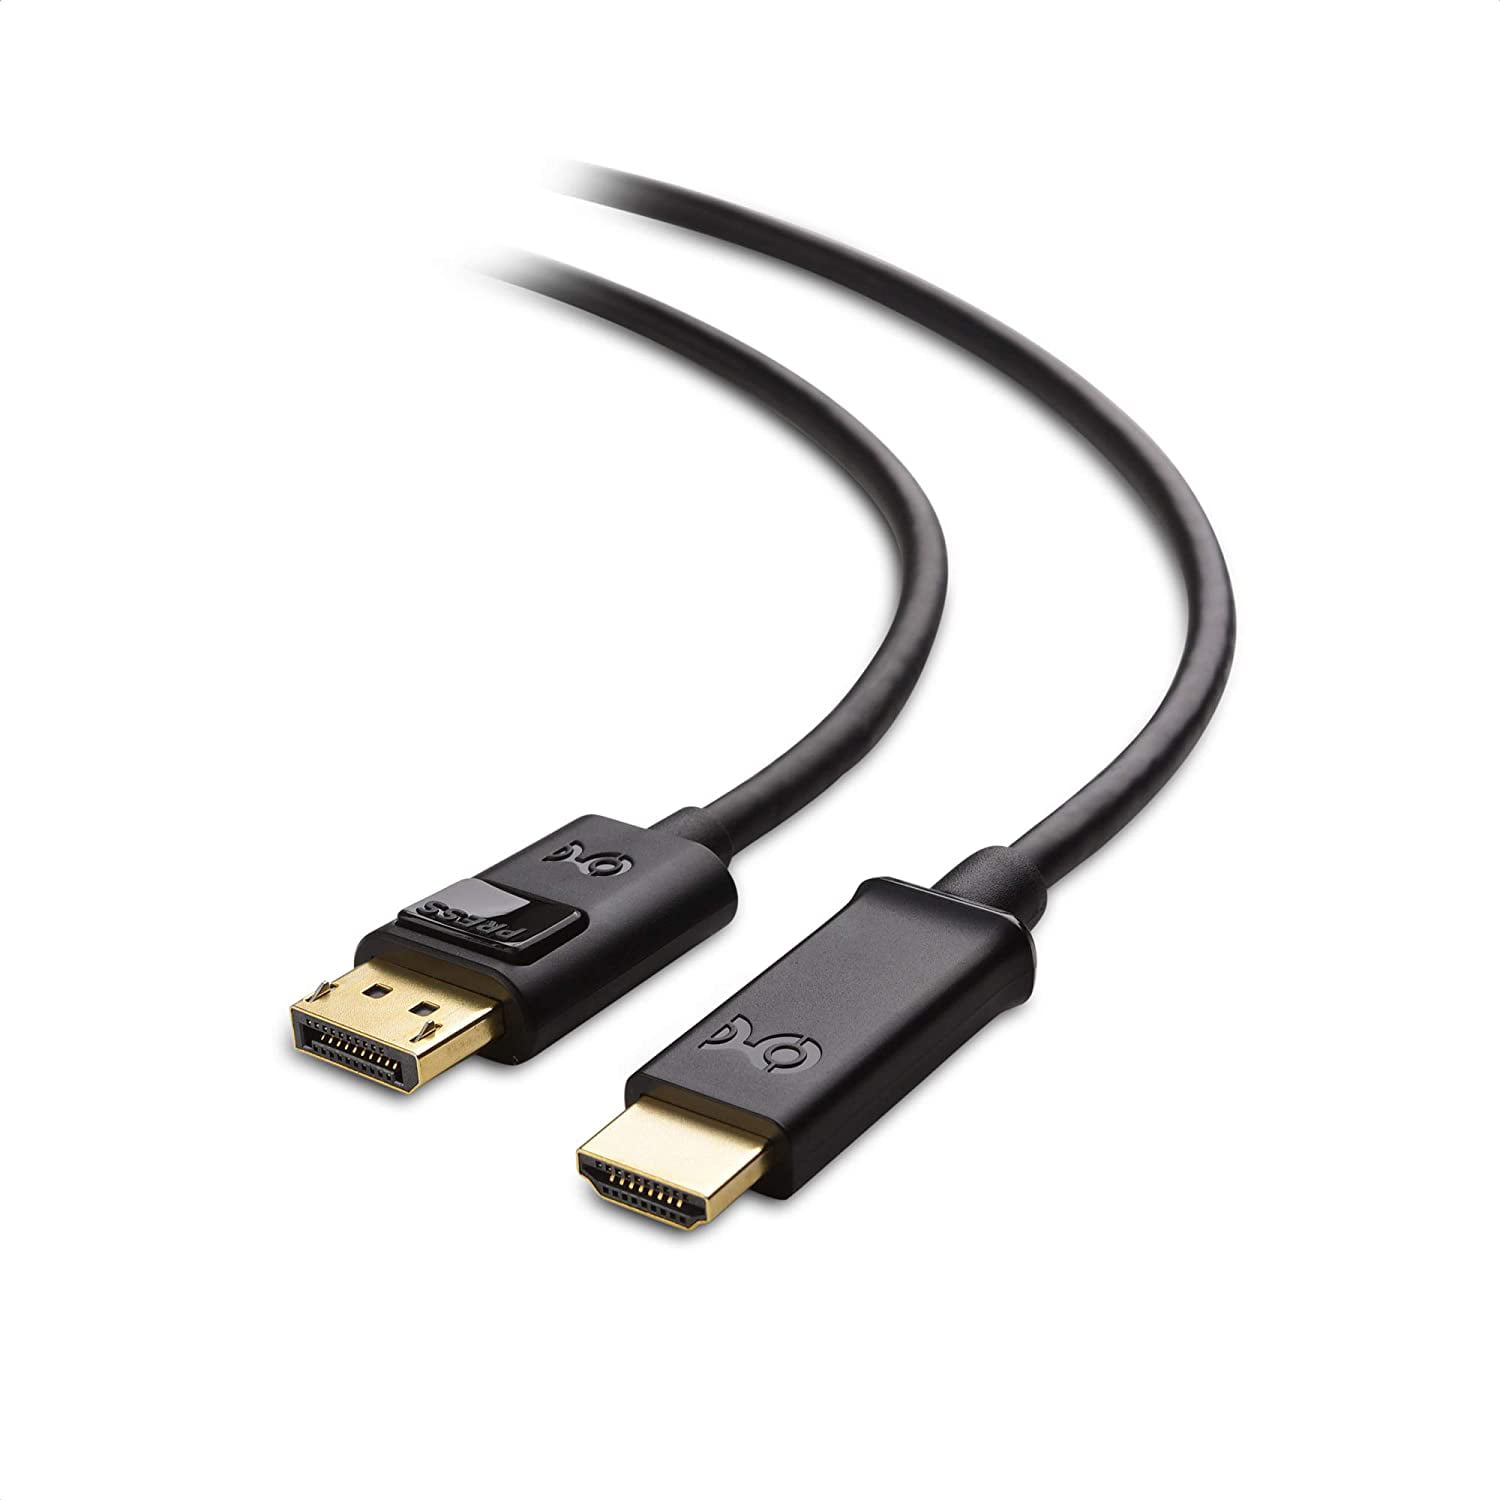 Matters Unidirectional DisplayPort to HDTV Adapter Cable to HDTV) 35 Feet Walmart.com